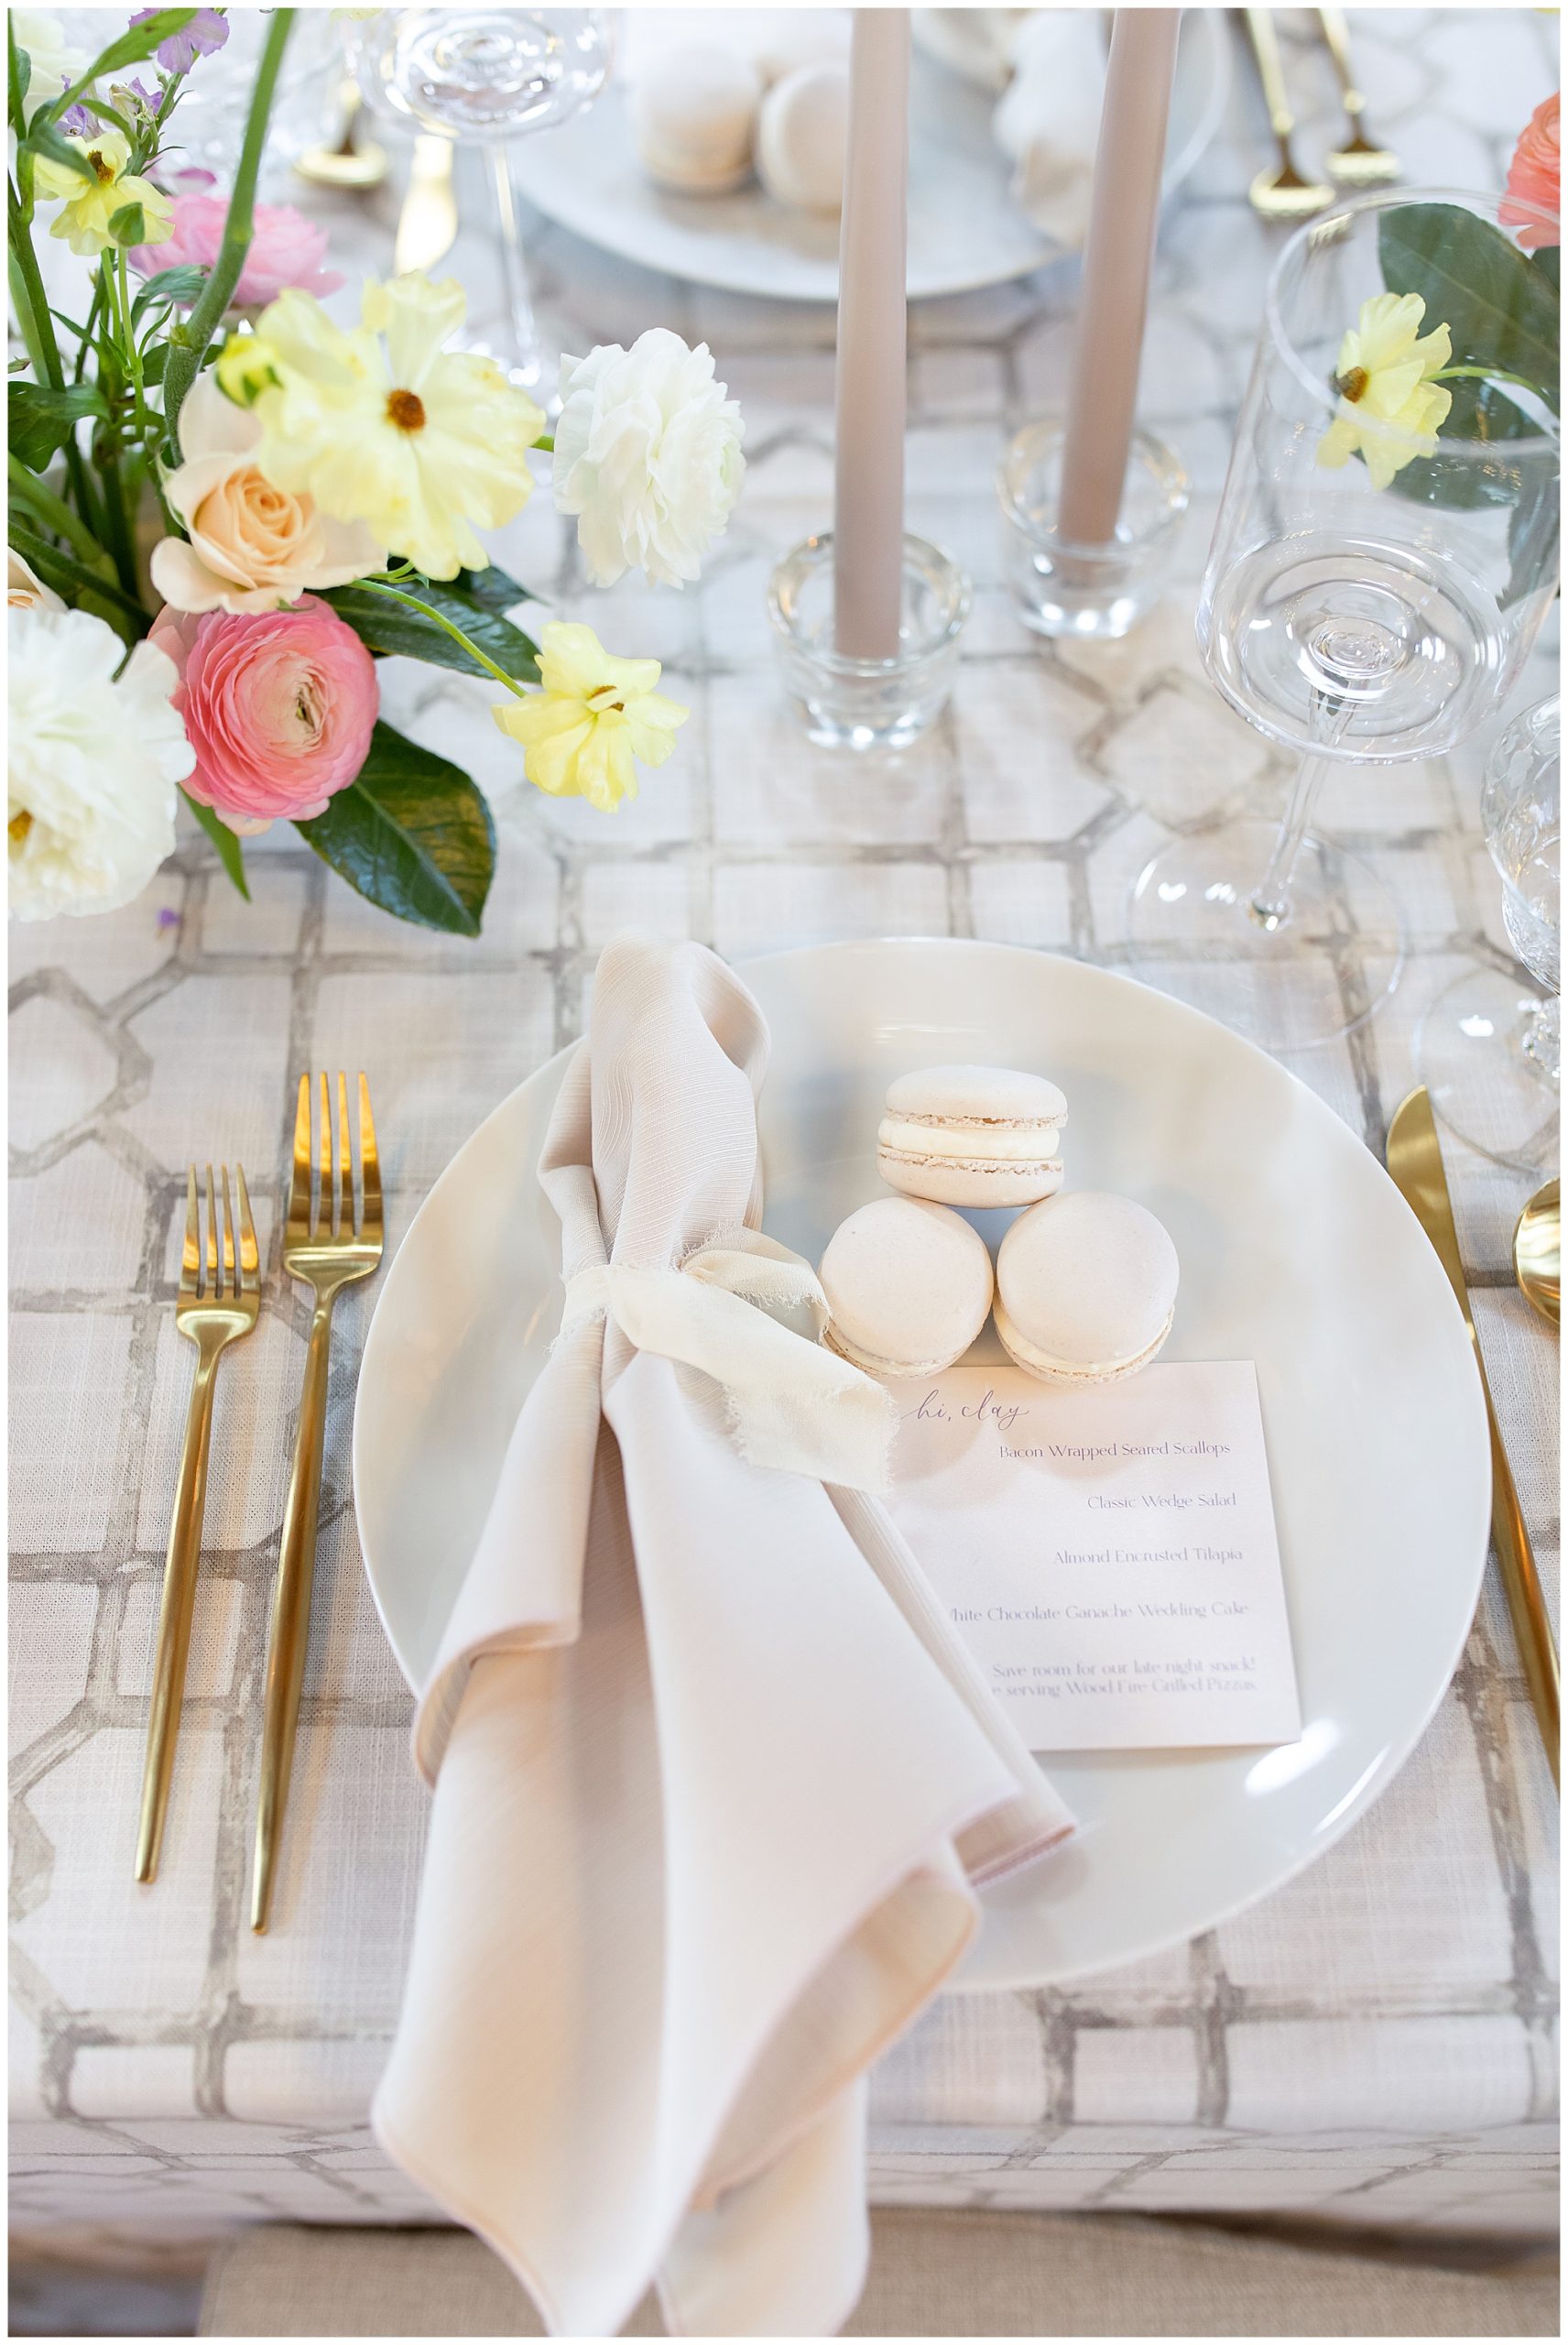 macaroons and spring florals at elegant wedding place setting